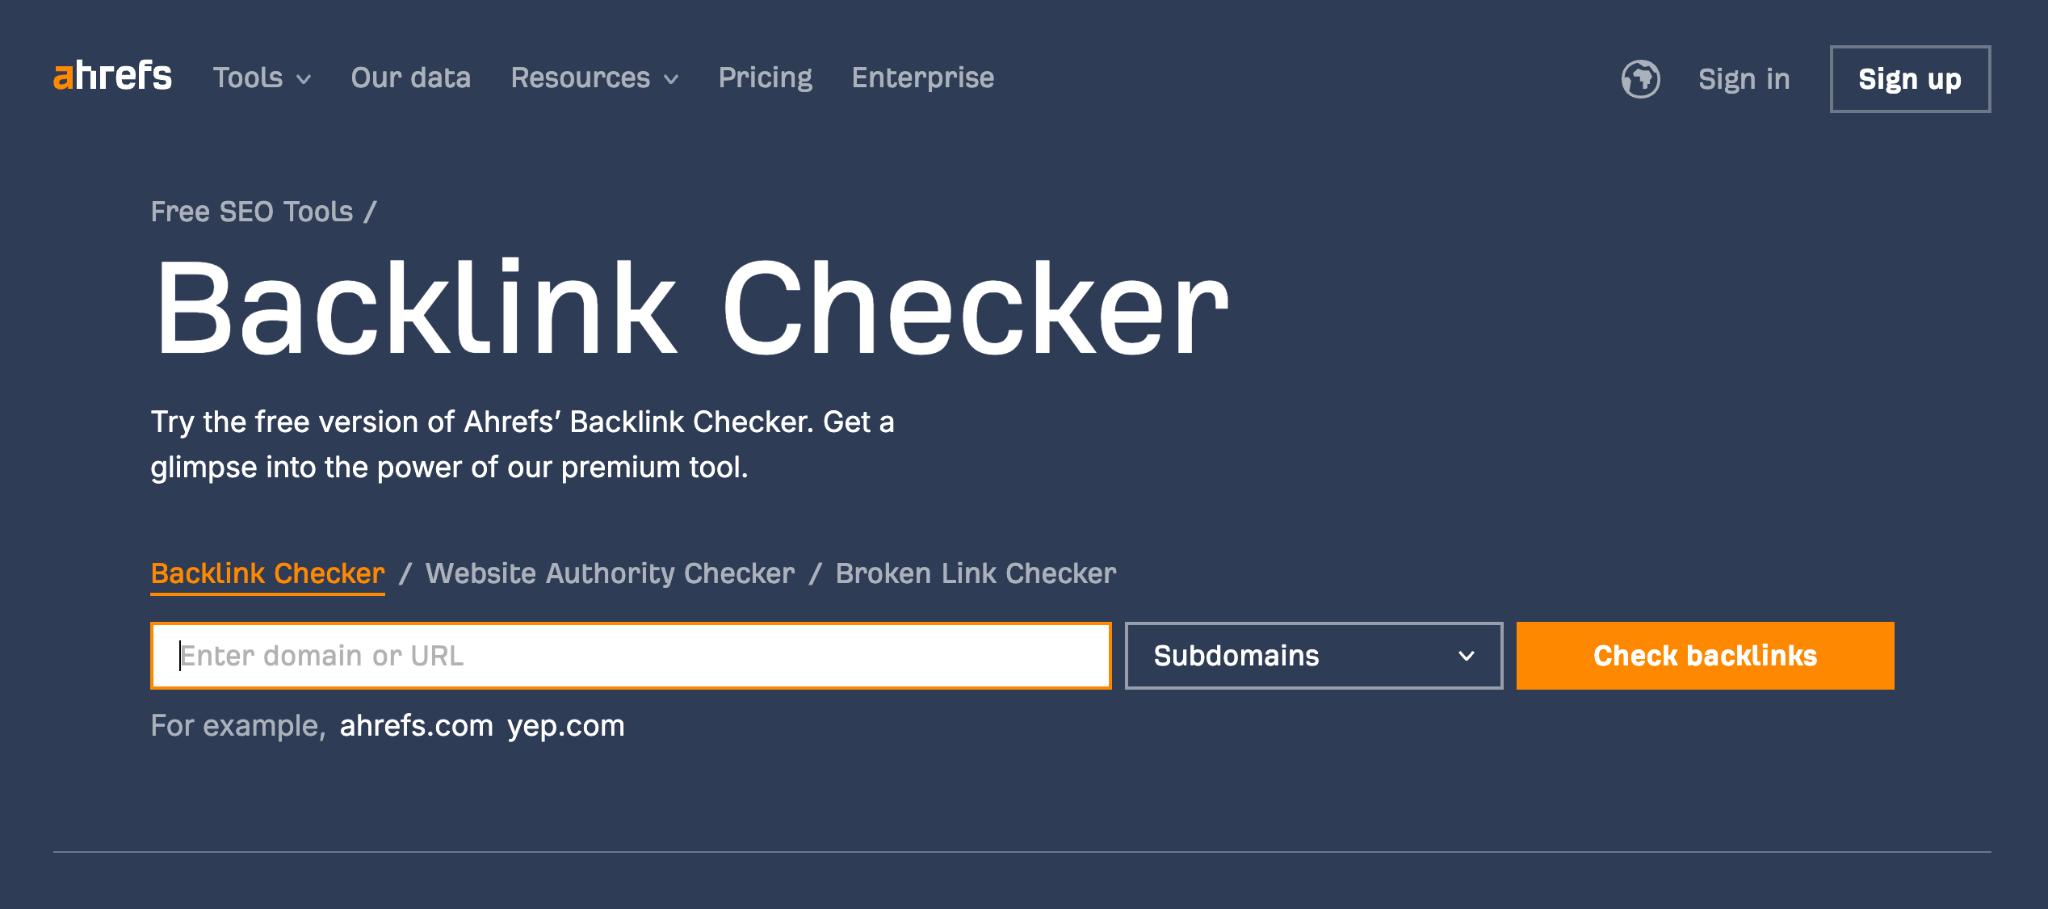 Our current "backlink checker" landing page